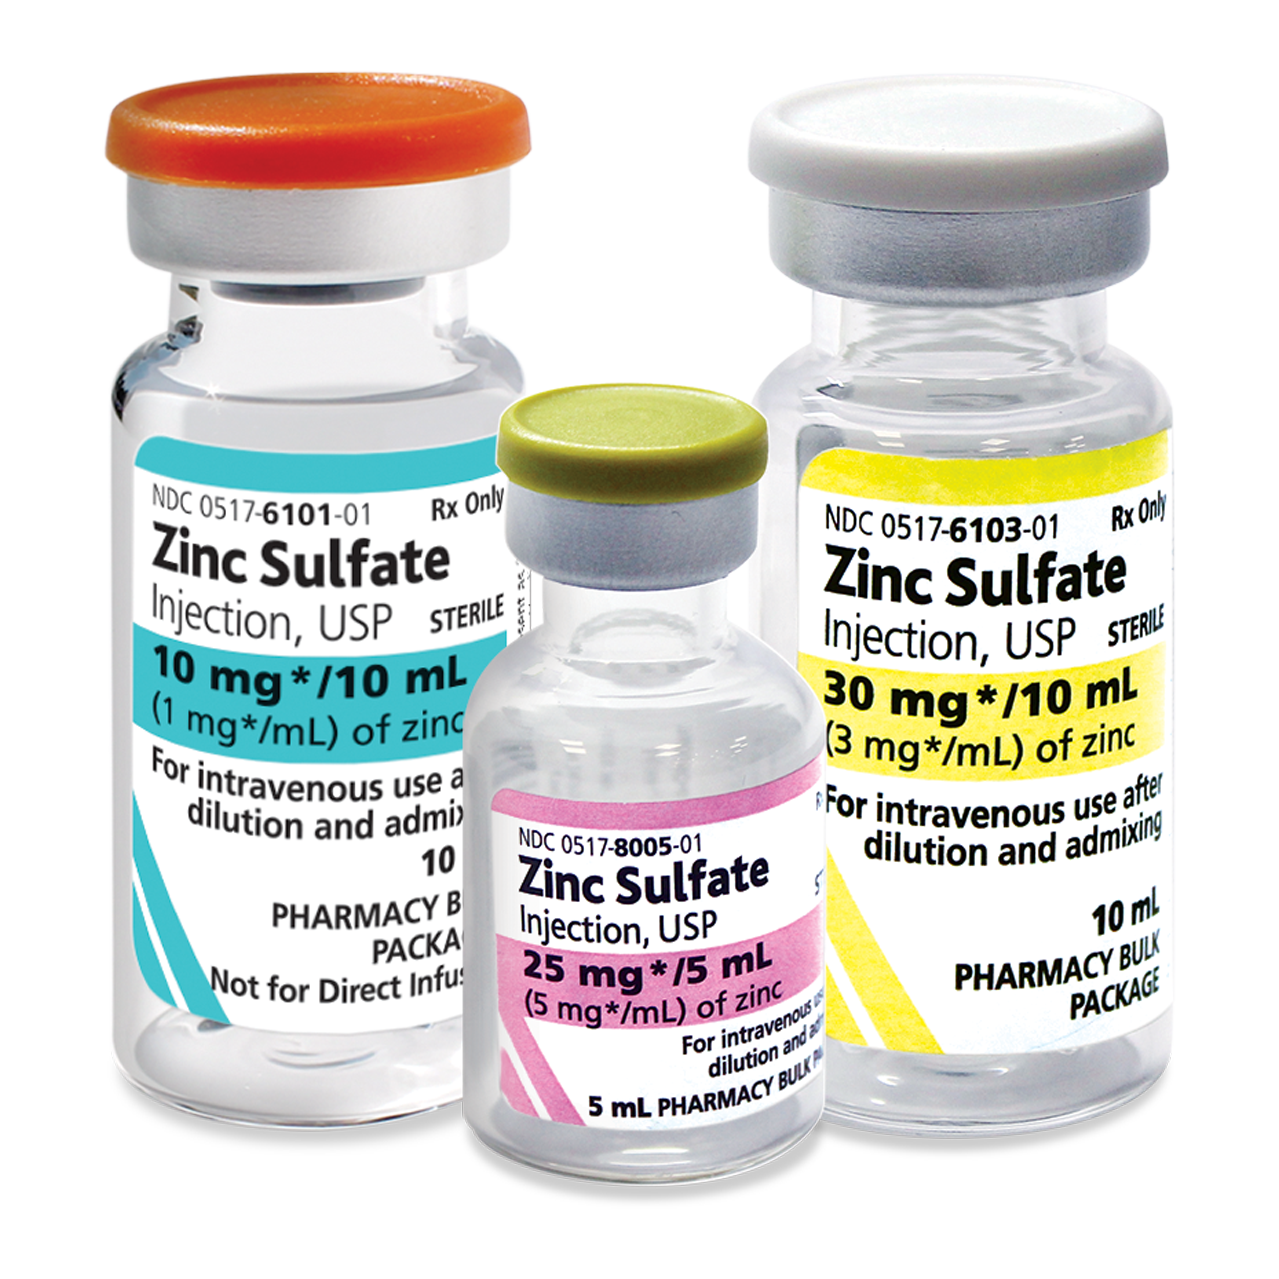 Zinc Sulfate Injection - Pictures